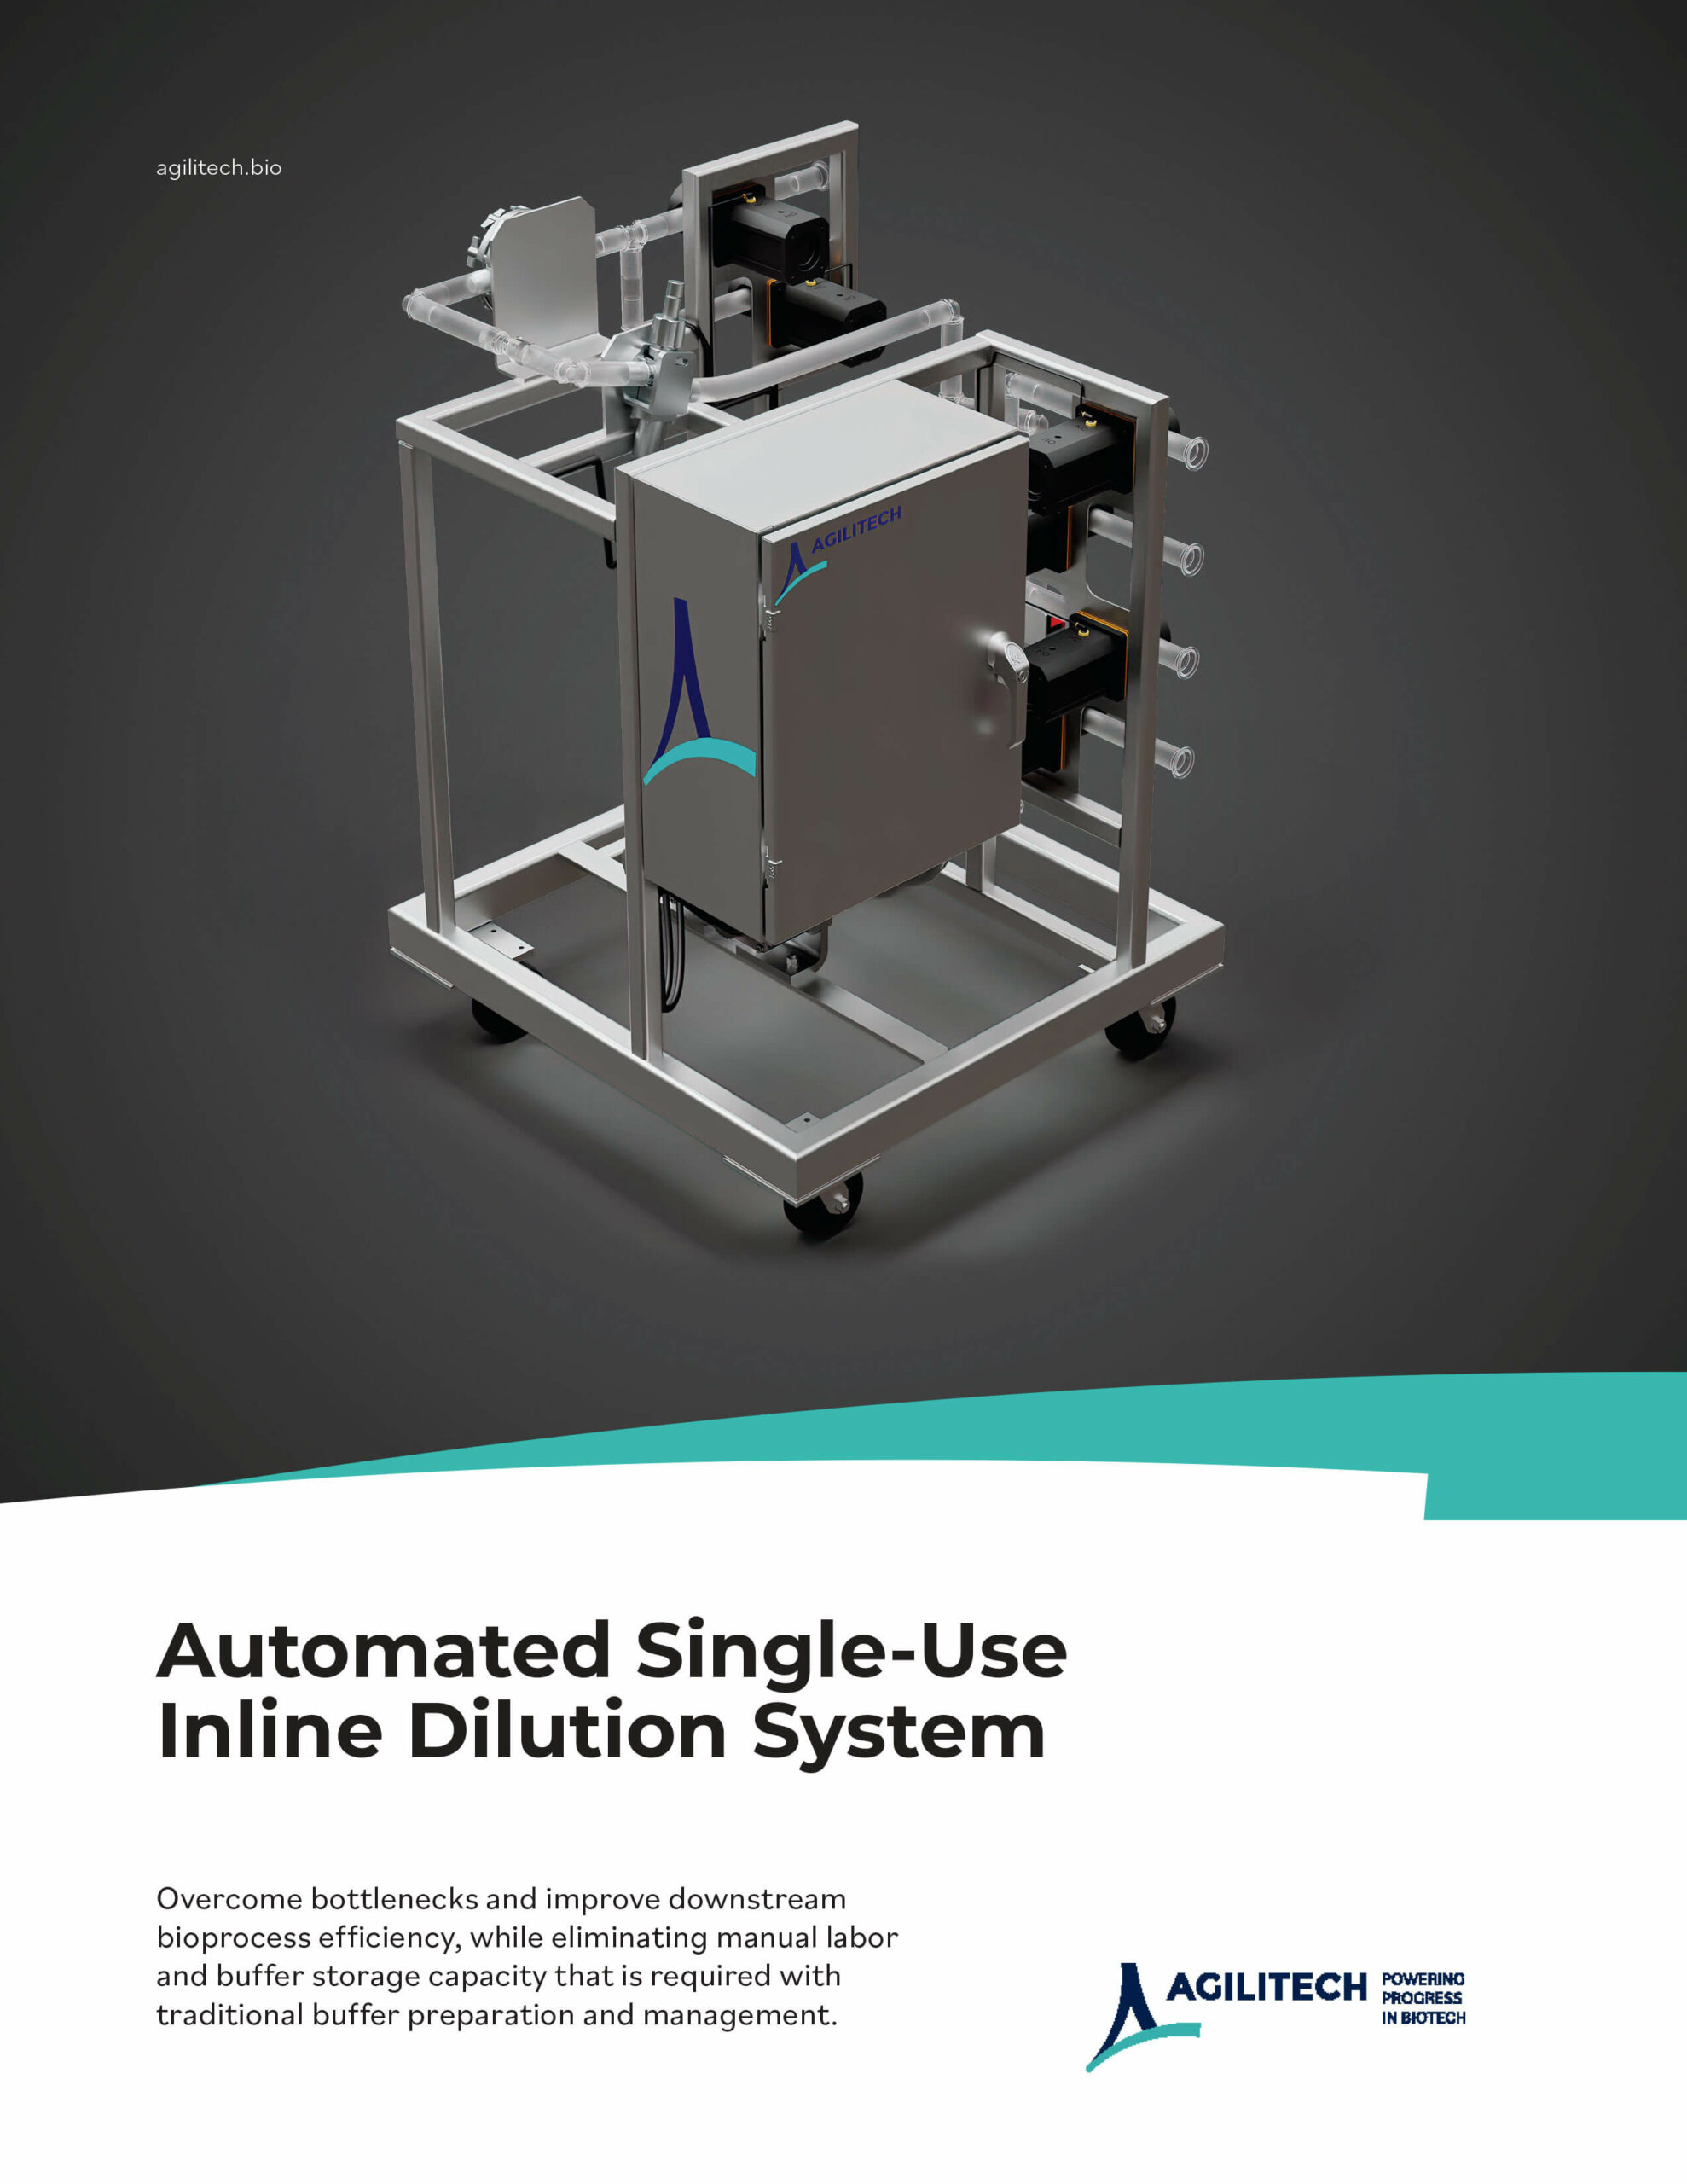 Agilitech Single-use Inline Dilution System